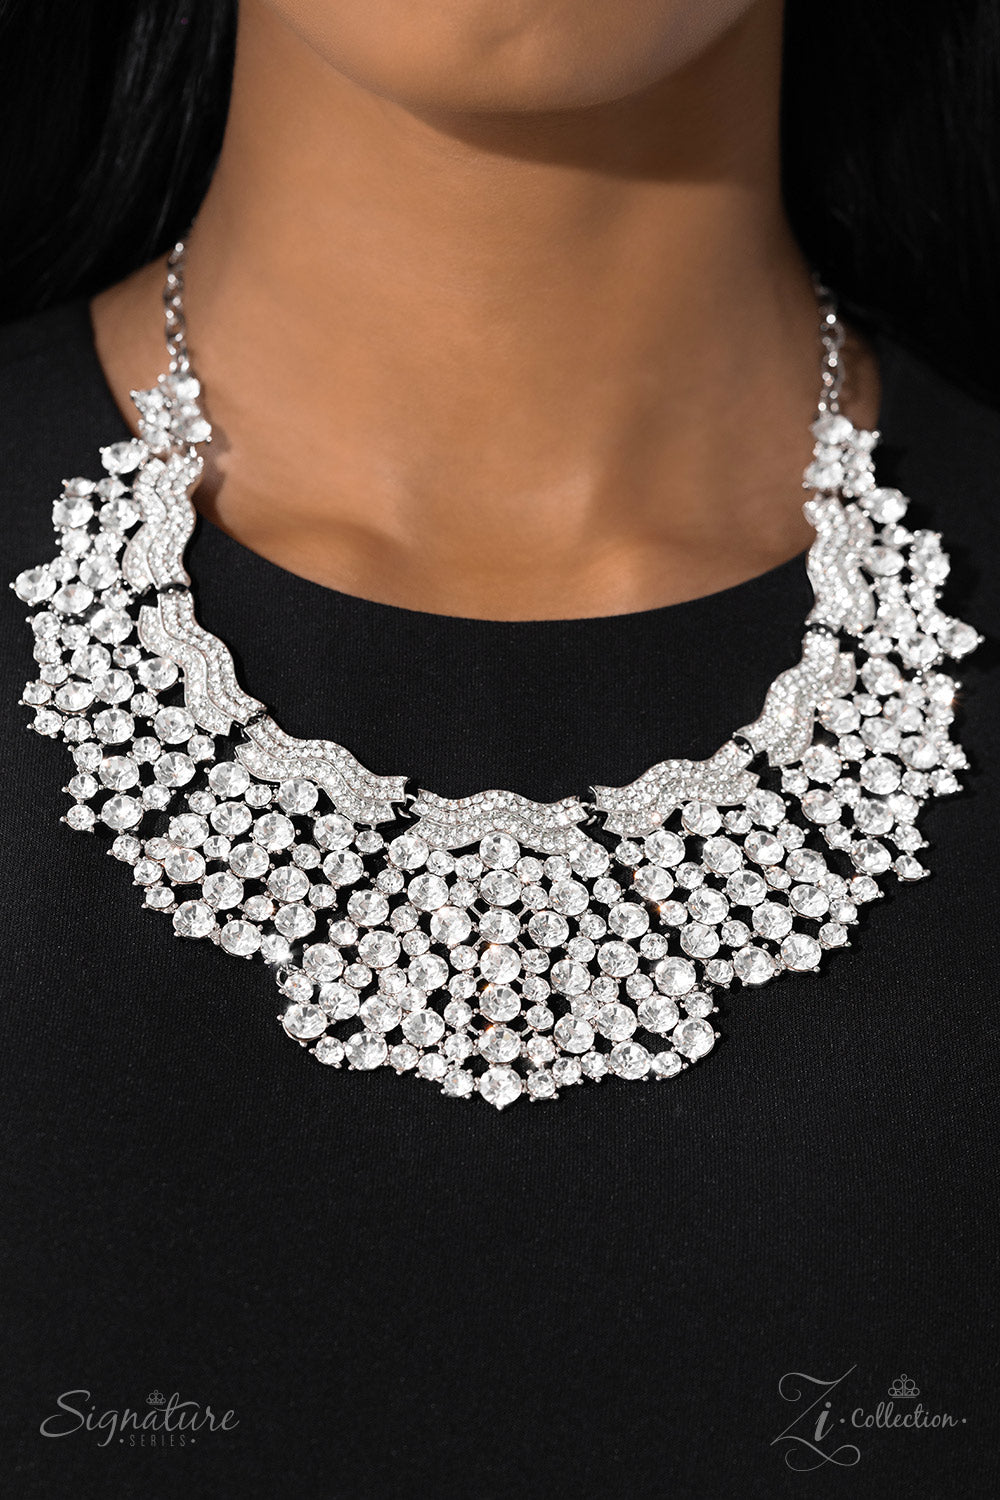 Paparazzi Accessories The DEtta Wavy silver bars, encrusted in white rhinestones, create a striking silhouette as they fall along the neckline. An explosion of sparkle erupts below the brilliant bands, with countless white rhinestones strategically stagge